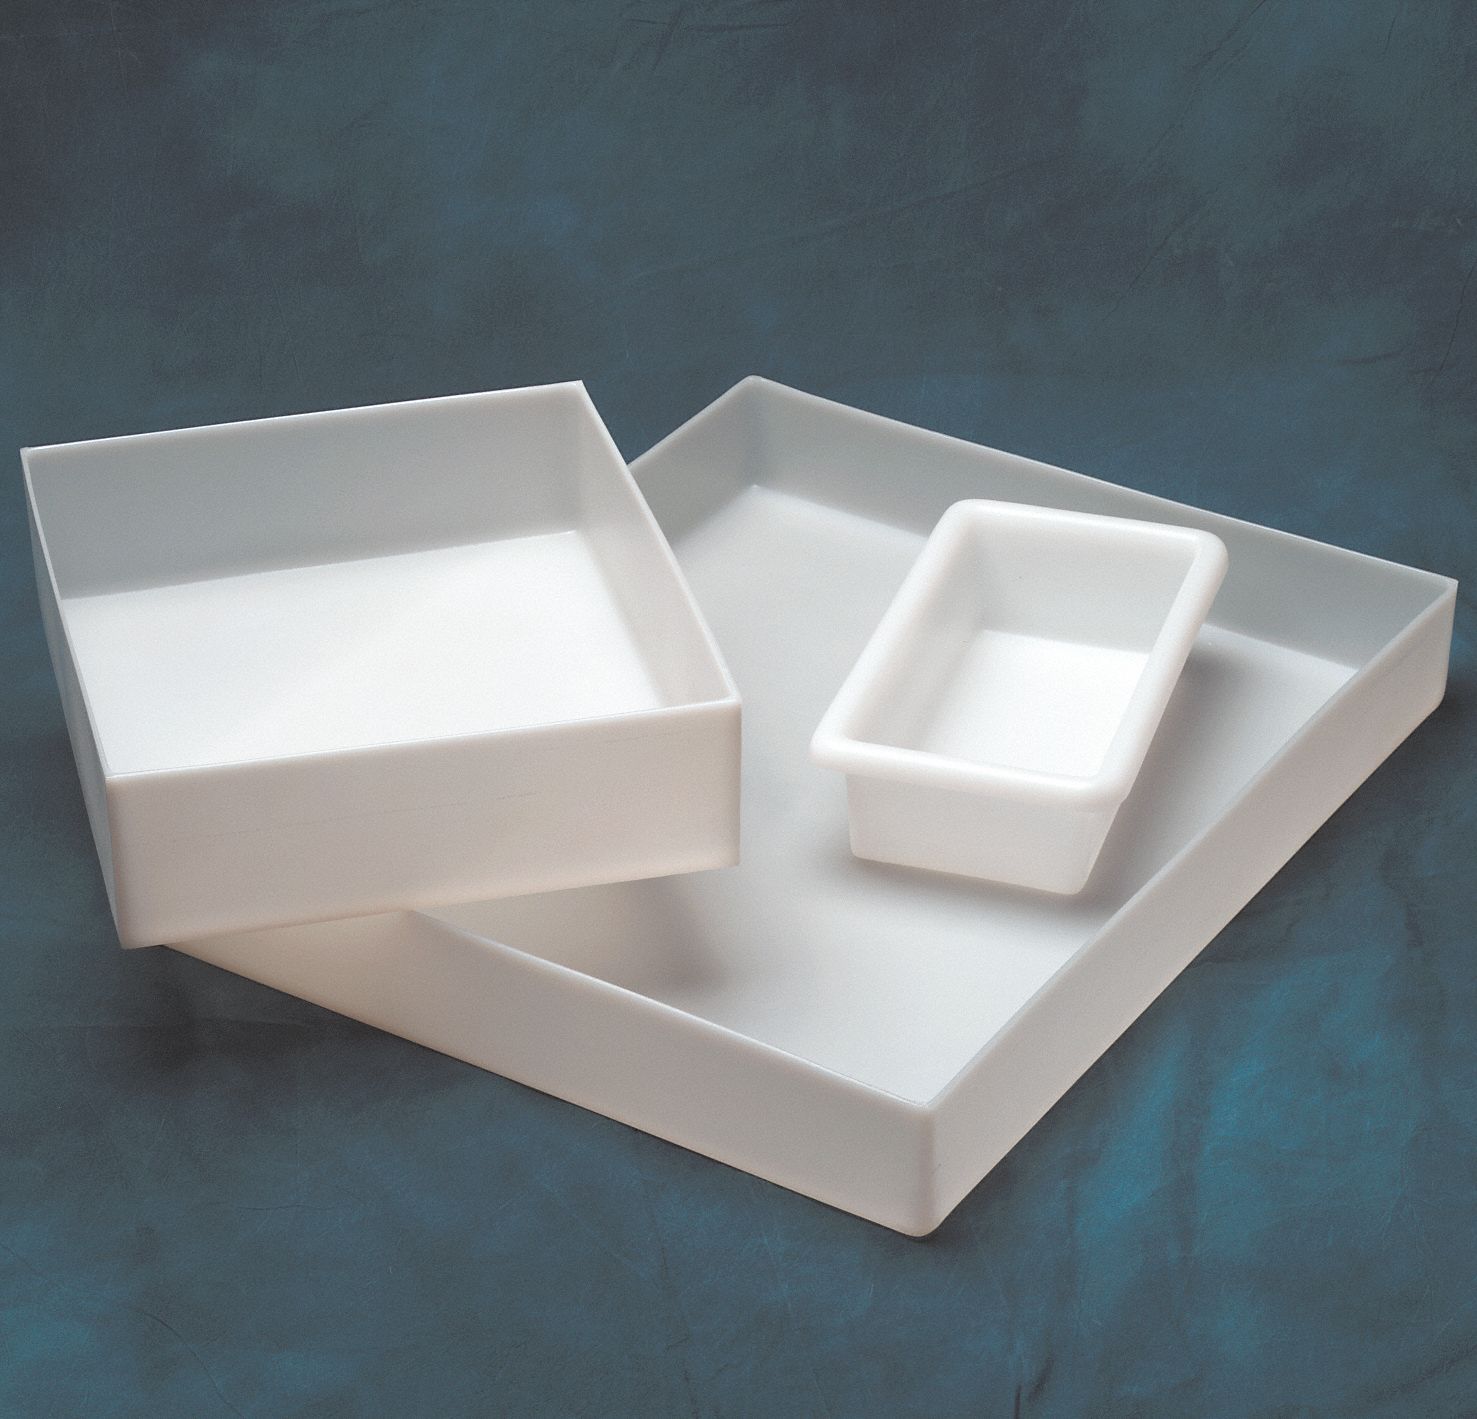 Straight Lip Tray: 12 qt Capacity, 20 3/4 in Overall Lg, 16 1/2 in Overall Wd, HDPE